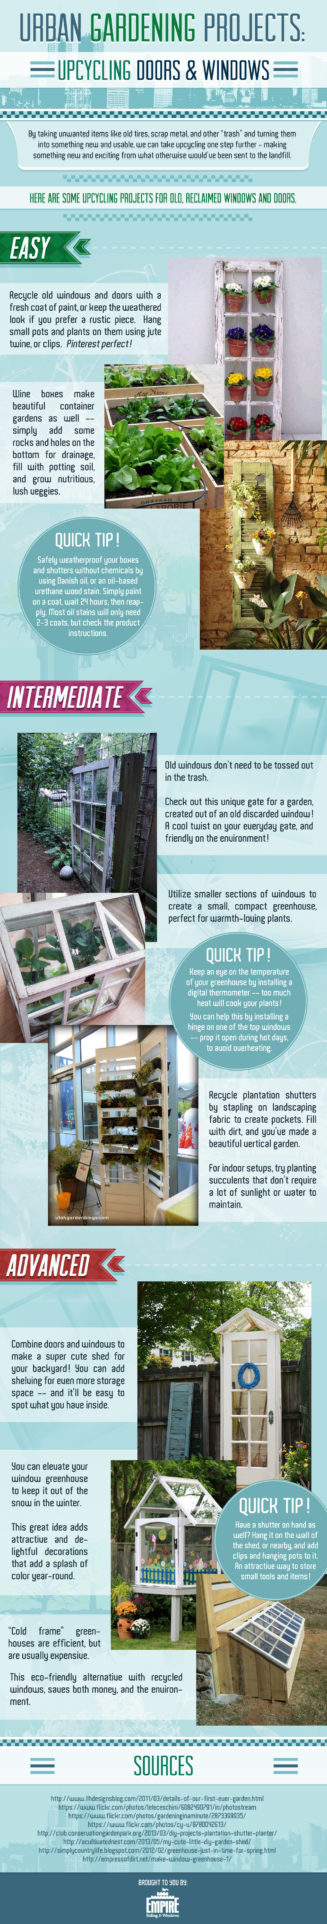 Upcycling Old Windows & Doors: Winter Urban Gardening Projects